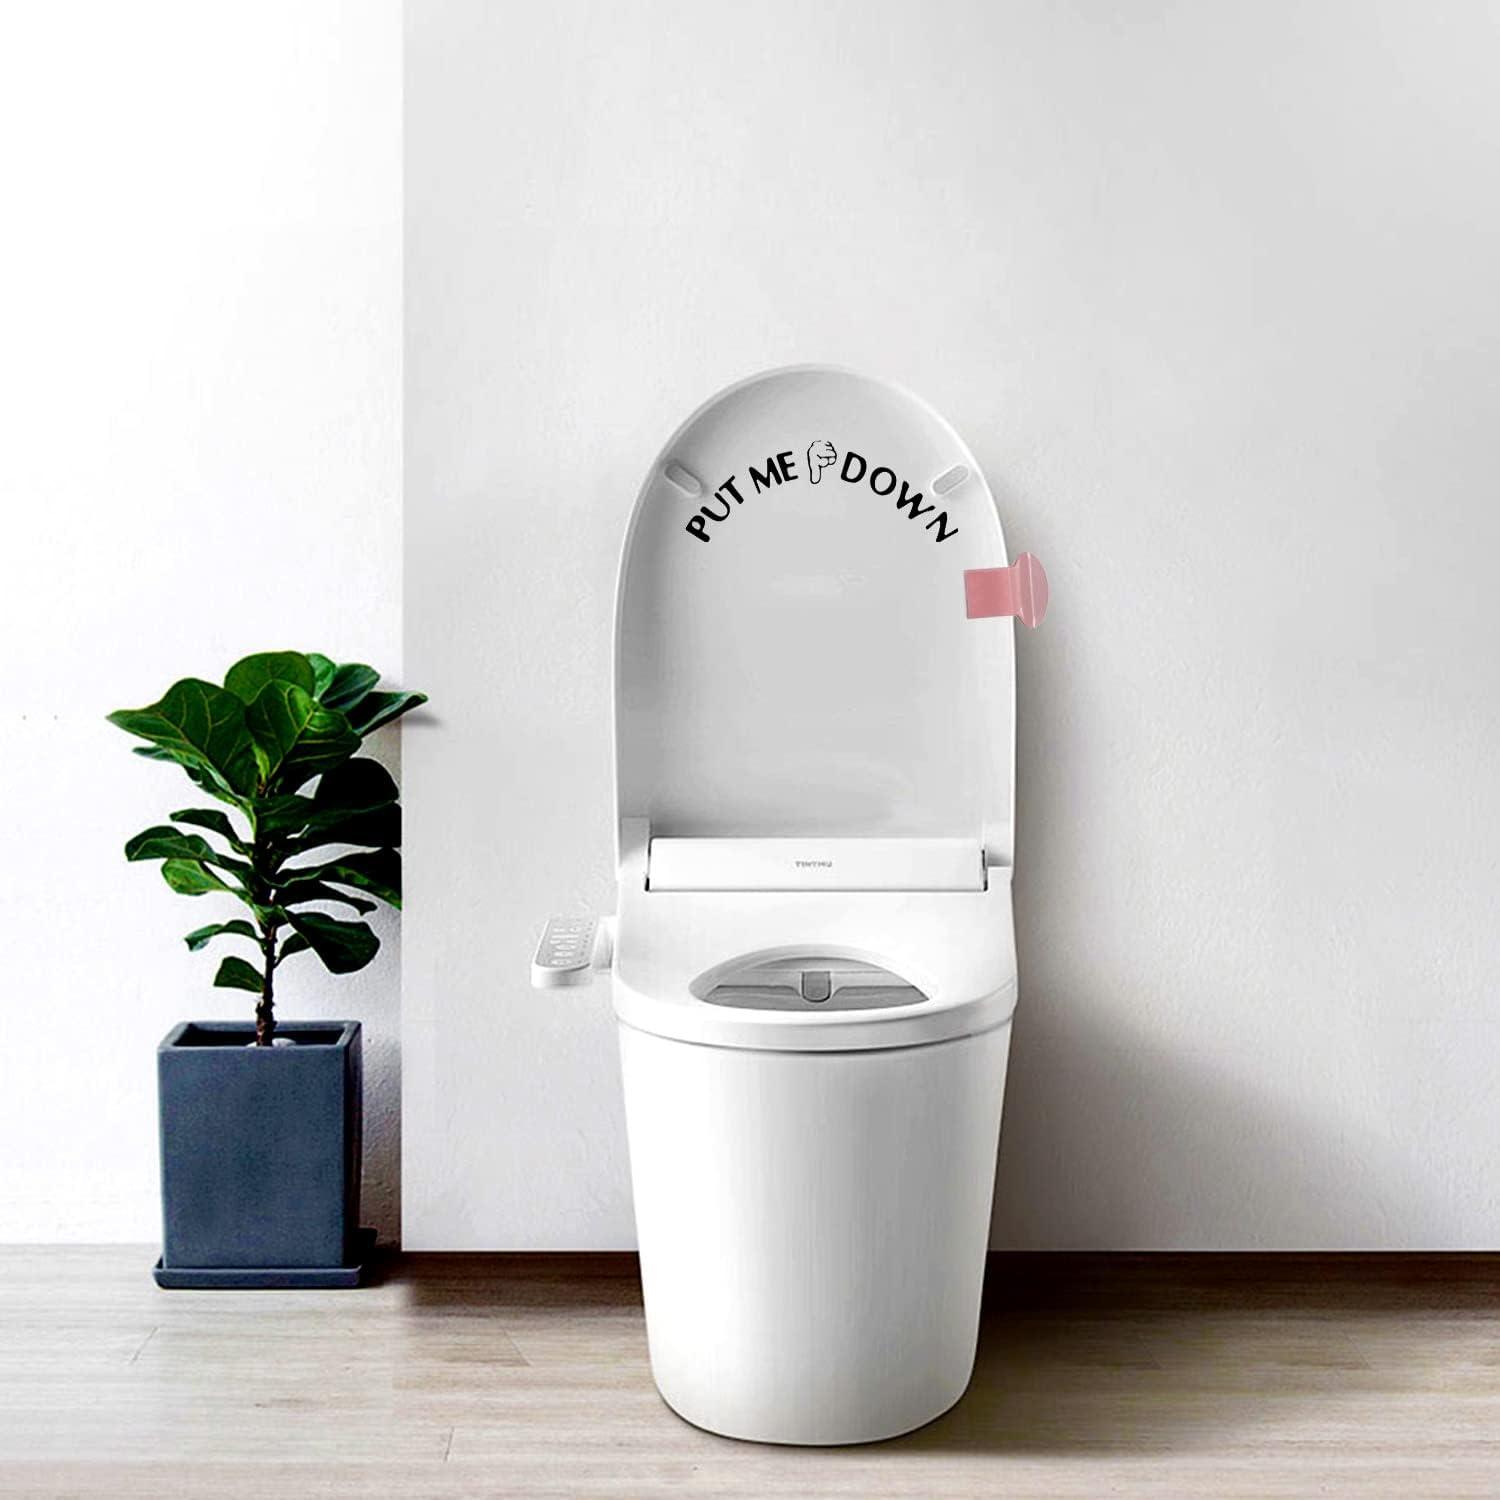 3 Pcs Toilet Seat Lifter Handle Avoid Touching Seat Cover Lifter and 10 Pcs Funny  Toilet Seat Stickers Decals for Bathroom, Home, Travel, Office and Hotel